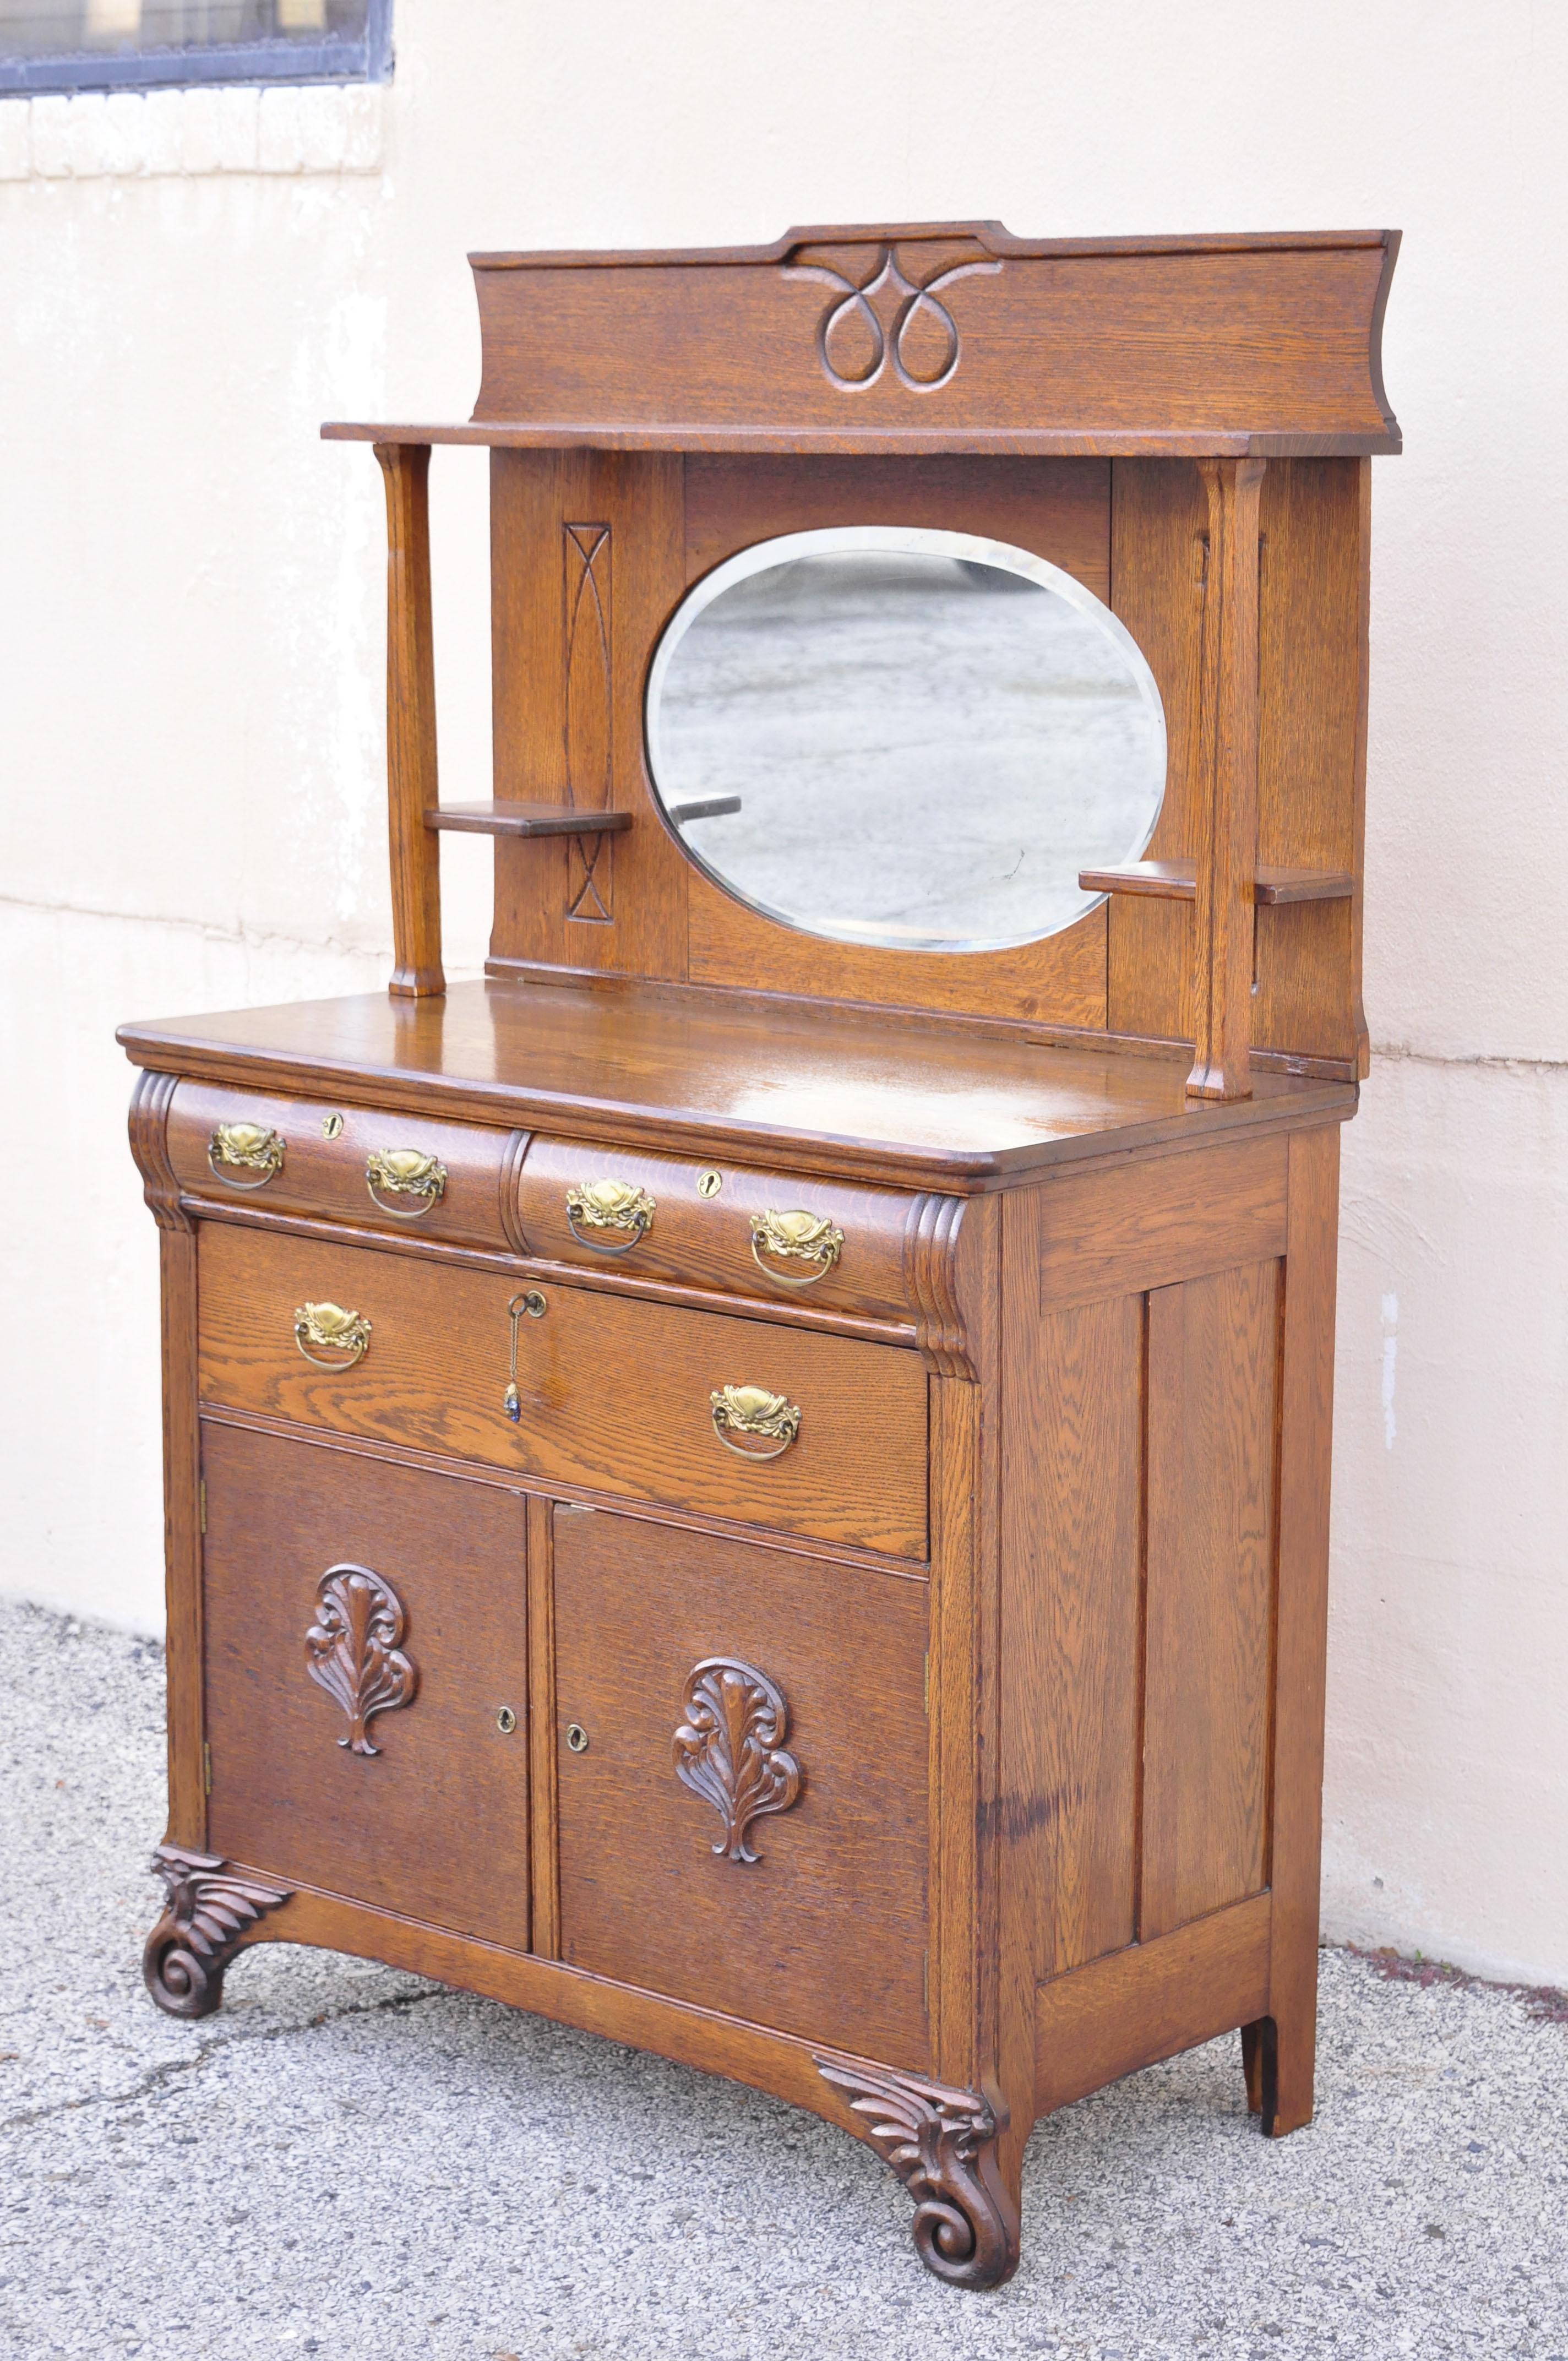 Antique Victorian oak wood sideboard buffett with Mirror Hutch Backsplash Shelf. Item features oval beveled mirror backsplash shelf, carved winged griffin feet, brass hardware, beautiful wood grain, nicely carved details, 3 dovetailed drawers, 2